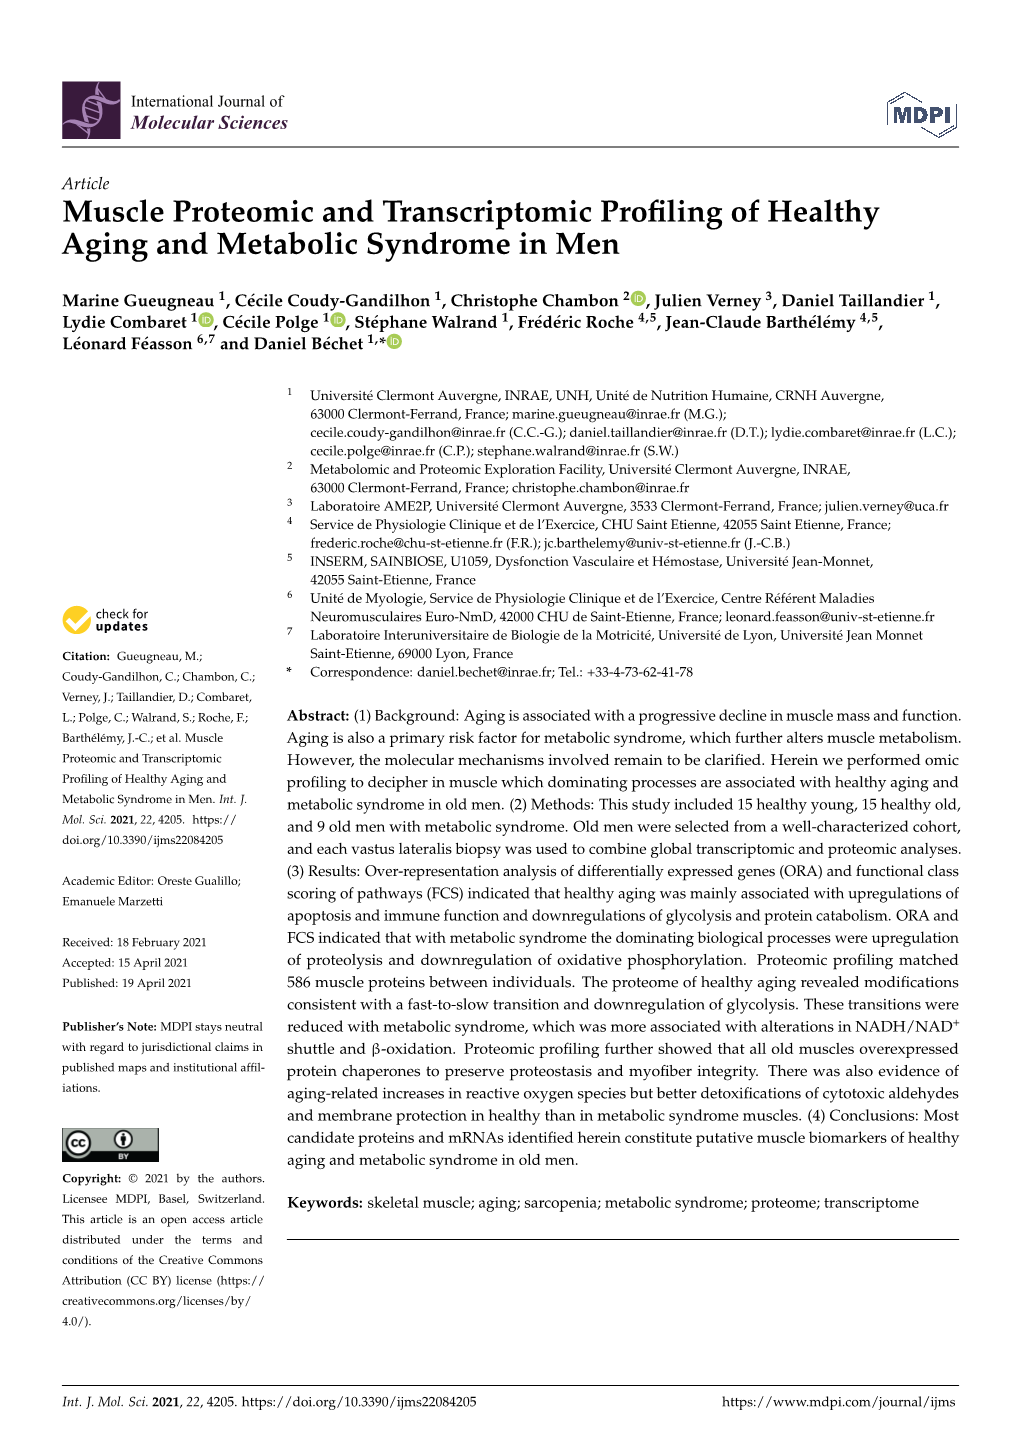 Muscle Proteomic and Transcriptomic Profiling of Healthy Aging and Metabolic Syndrome In